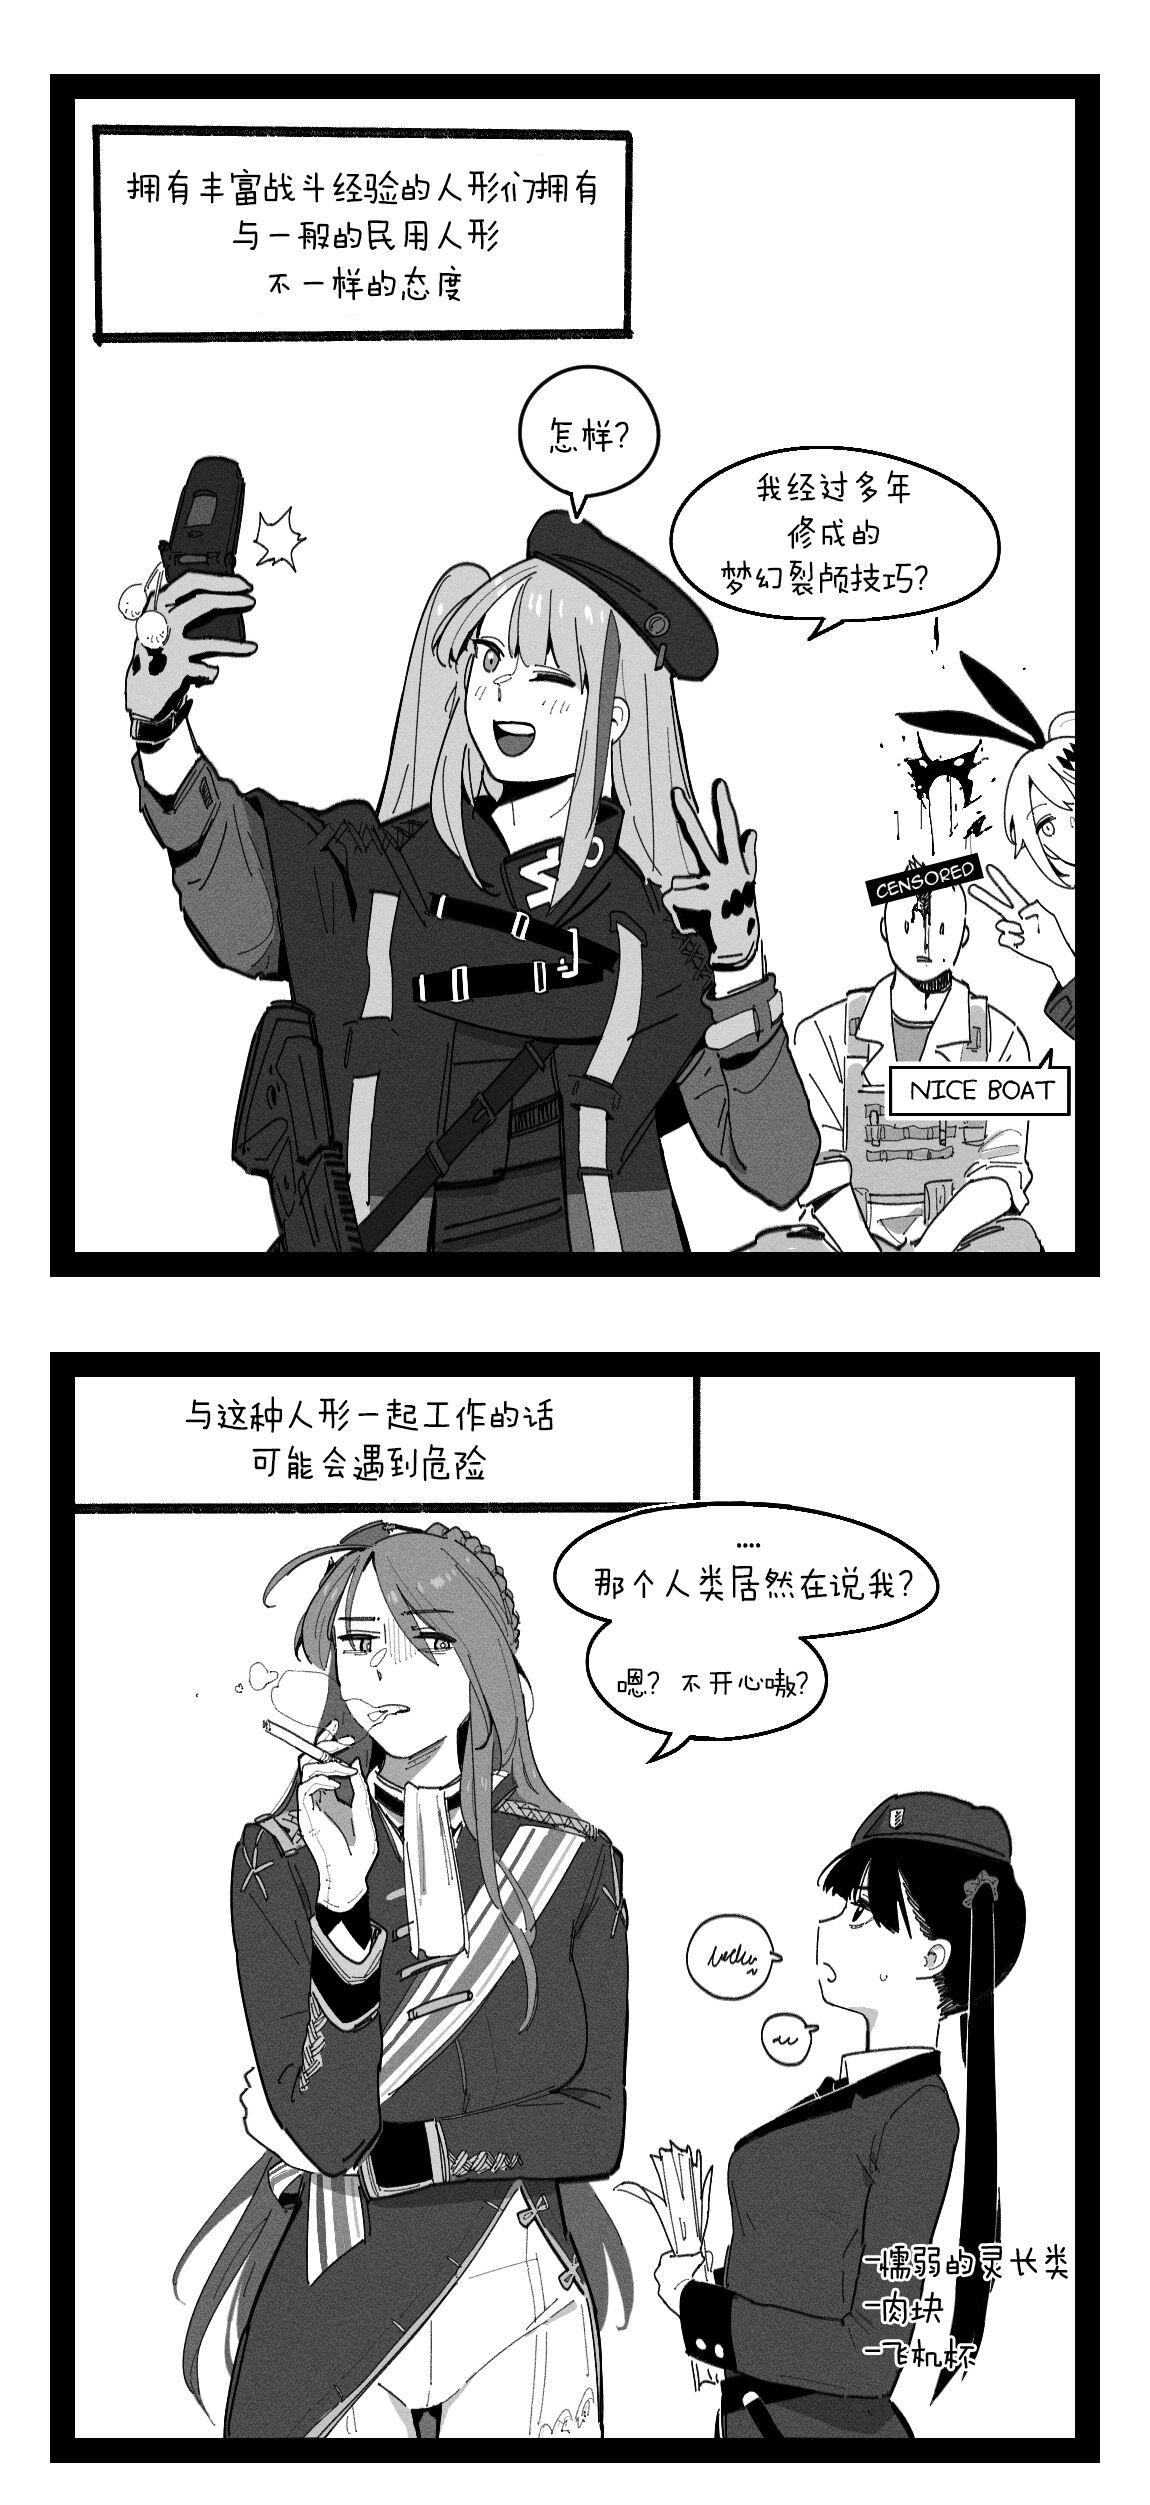  Griffin Commanders - Girls frontline Cum On Face - Page 1